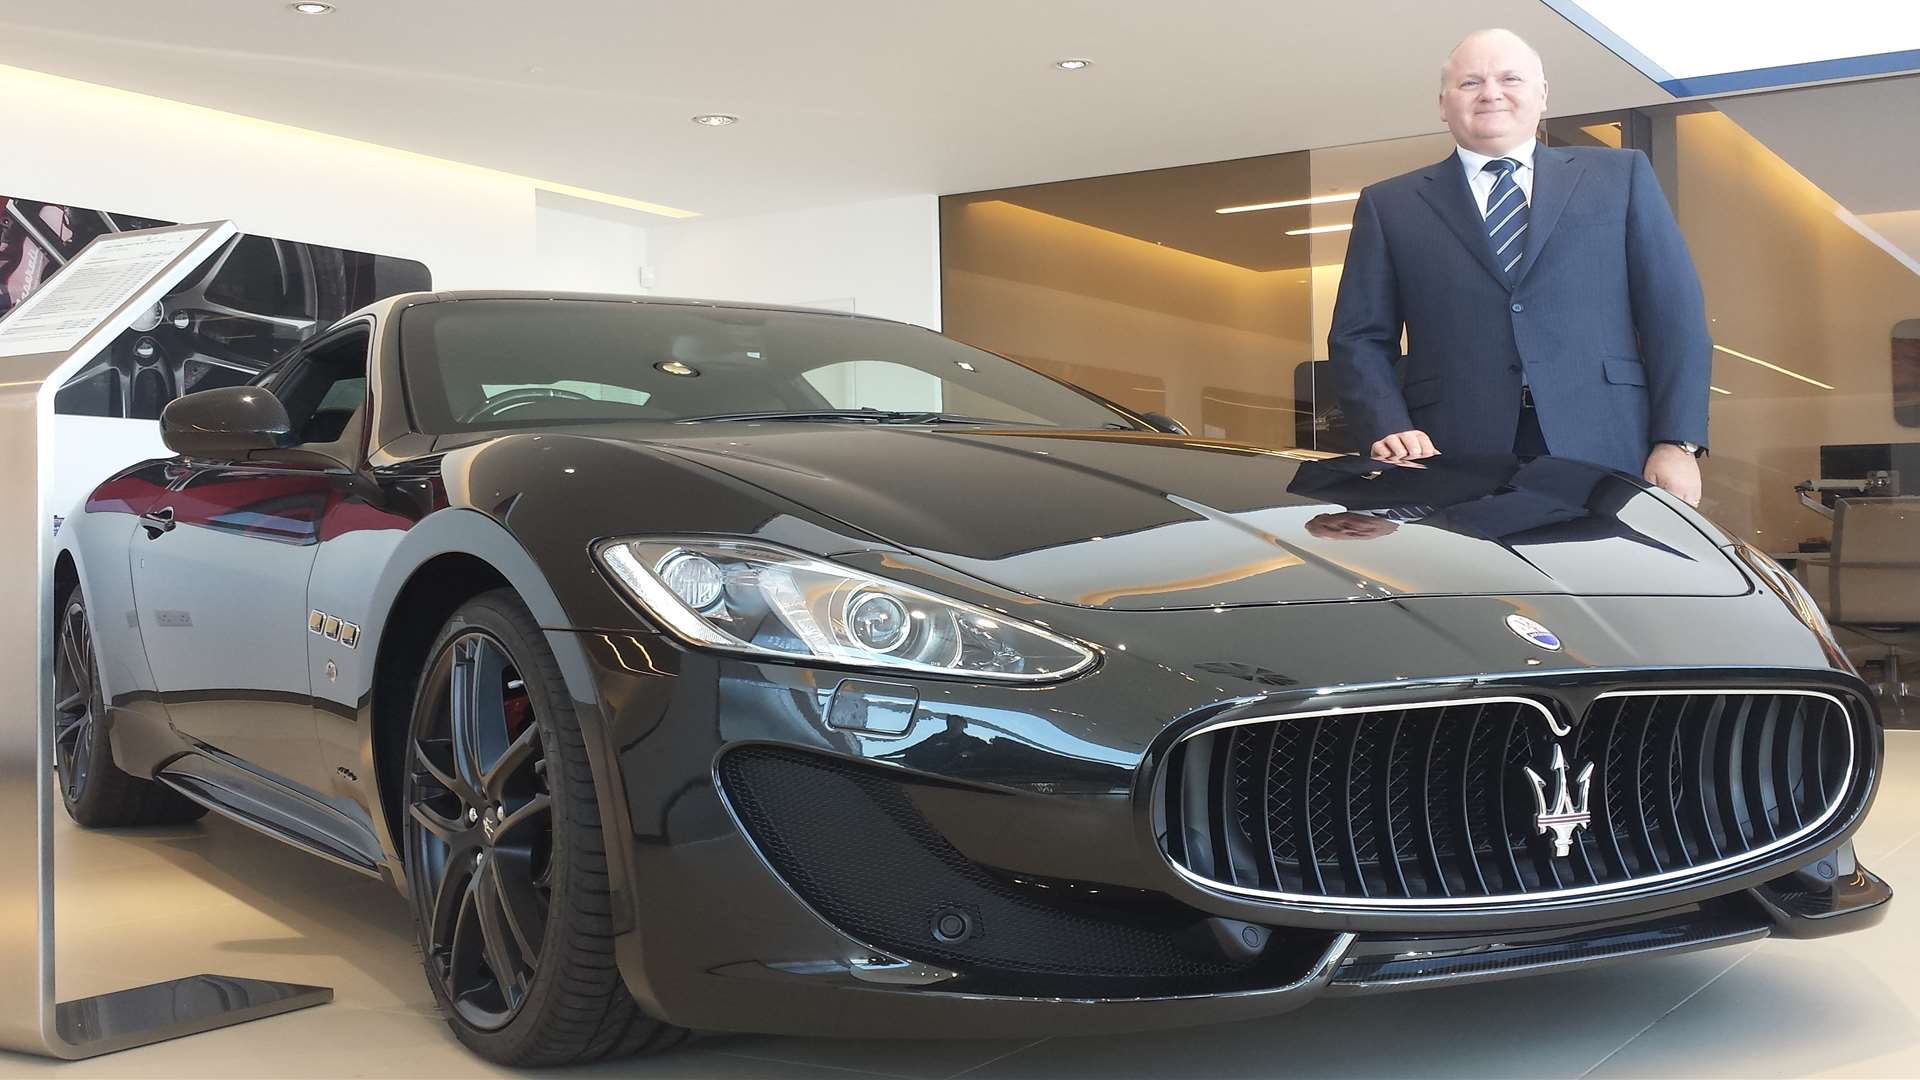 Motorline joint managing director Gary Obee at the new Maserati dealership in Maidstone